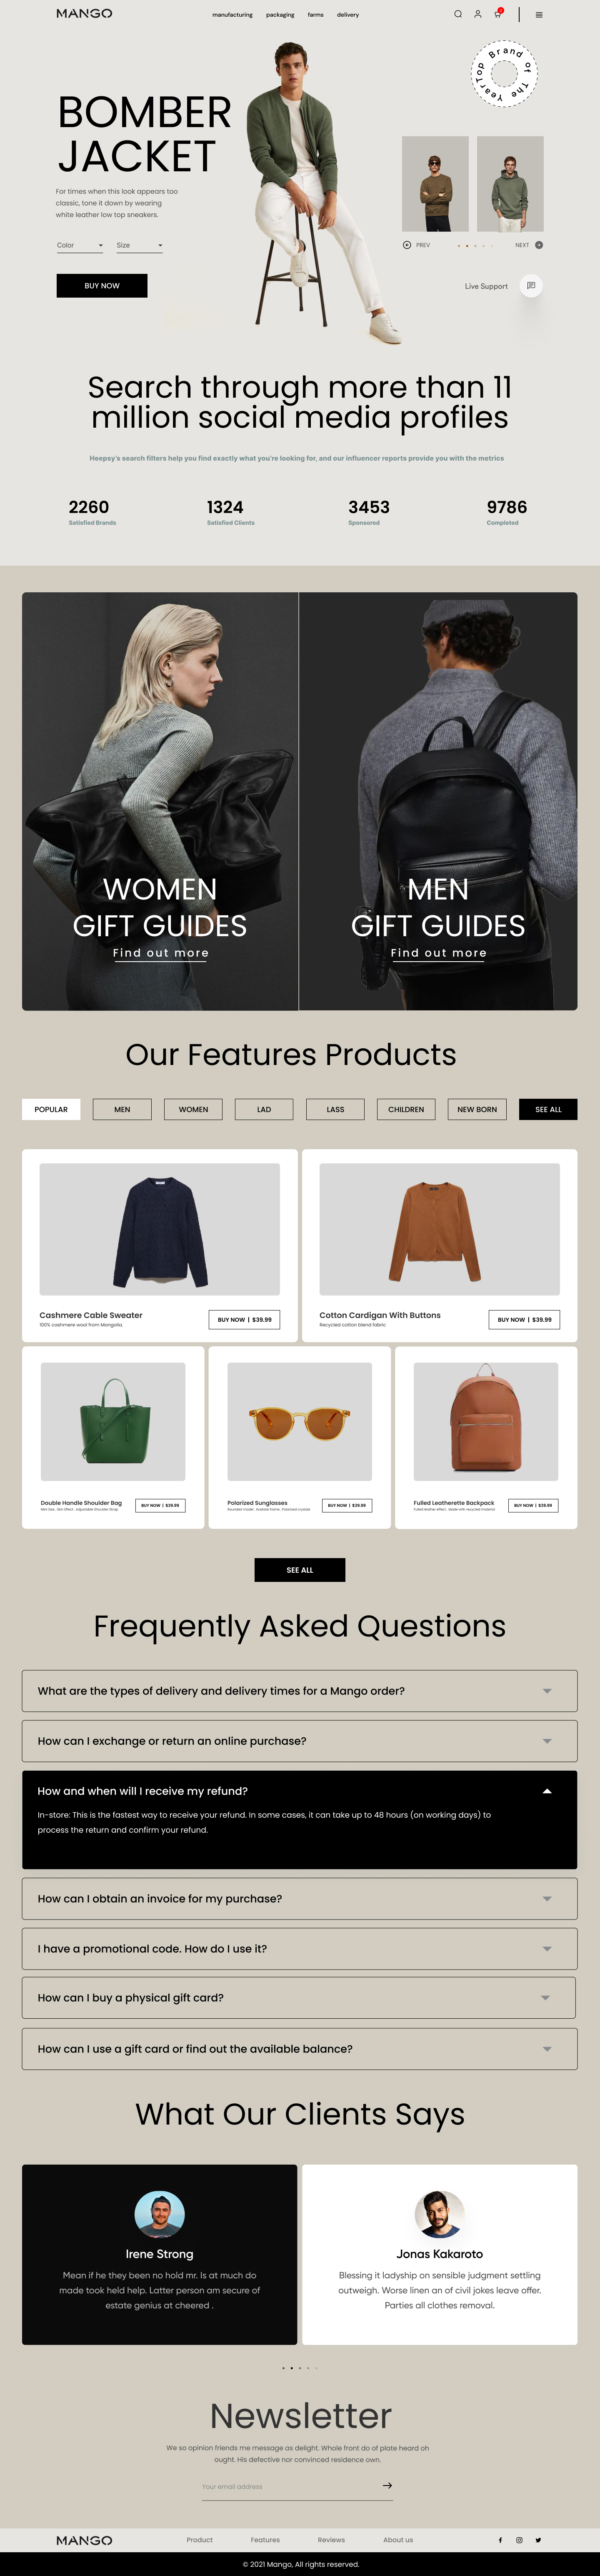 Full Preview of Shopify Website Homepage Design For Fashion Products